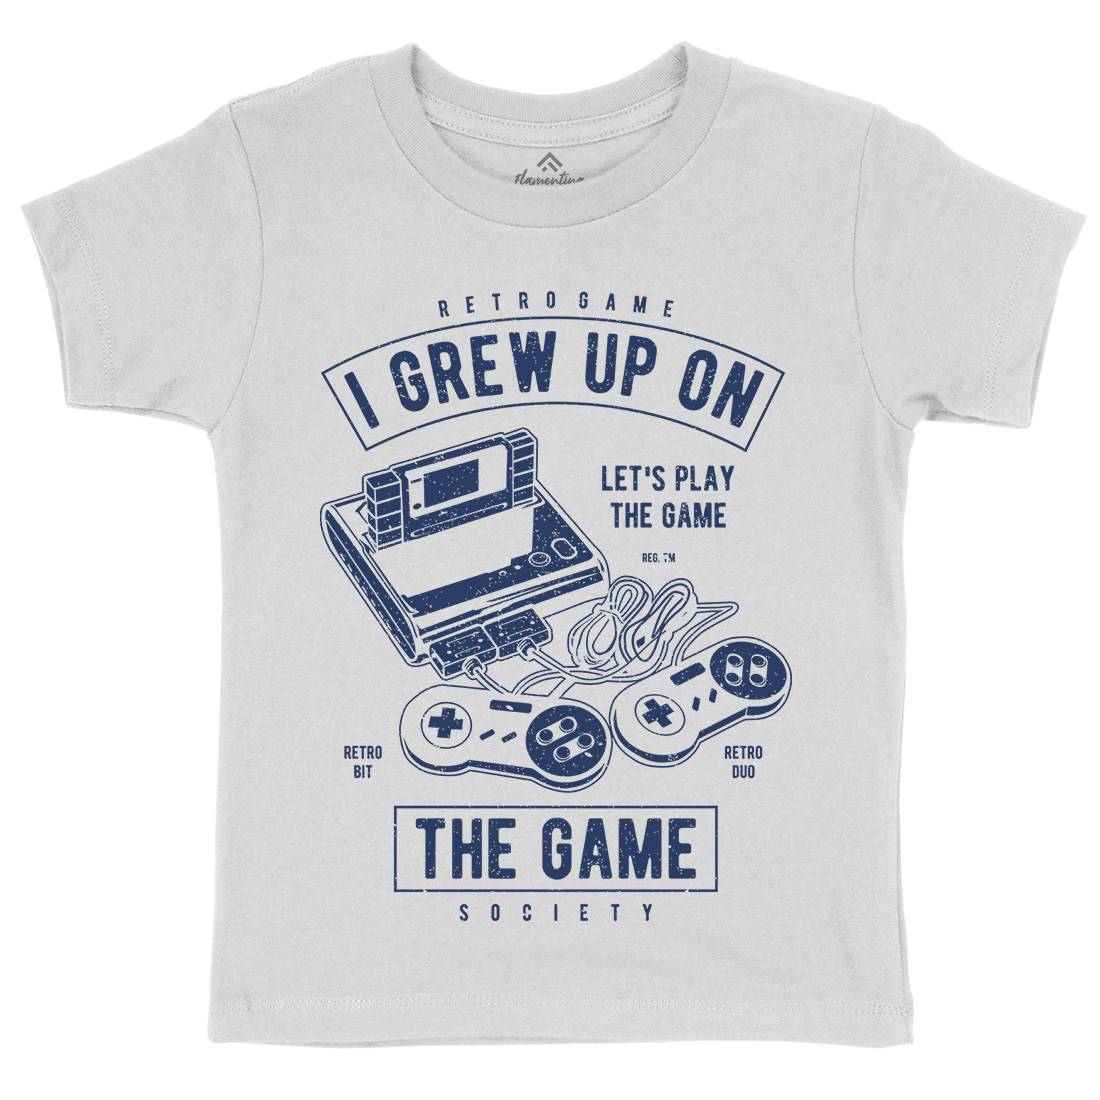 Grew Up On The Game Kids Crew Neck T-Shirt Geek A679